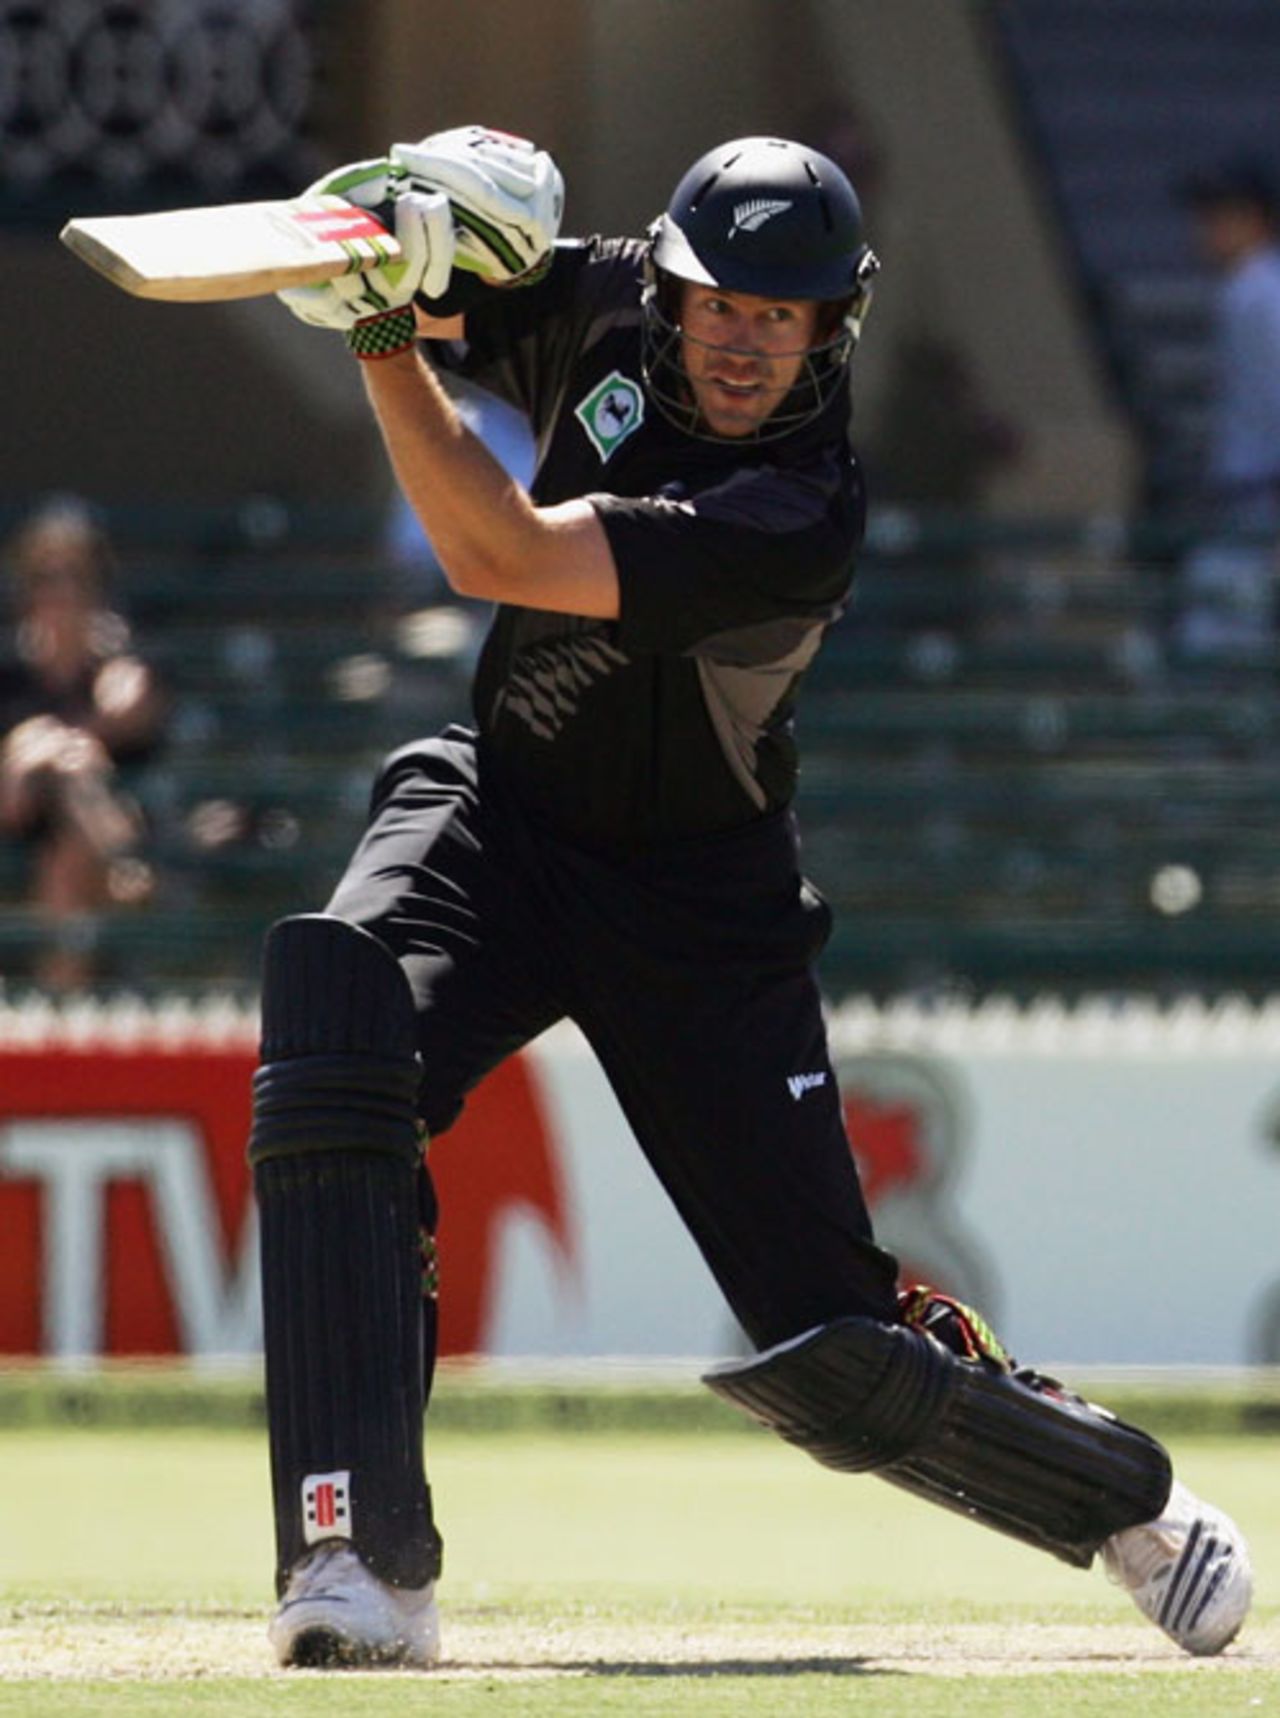 Jacob Oram's 86 rescued New Zealand from 67 for 5, England v New Zealand, CB Series, Adelaide, January 23, 2007